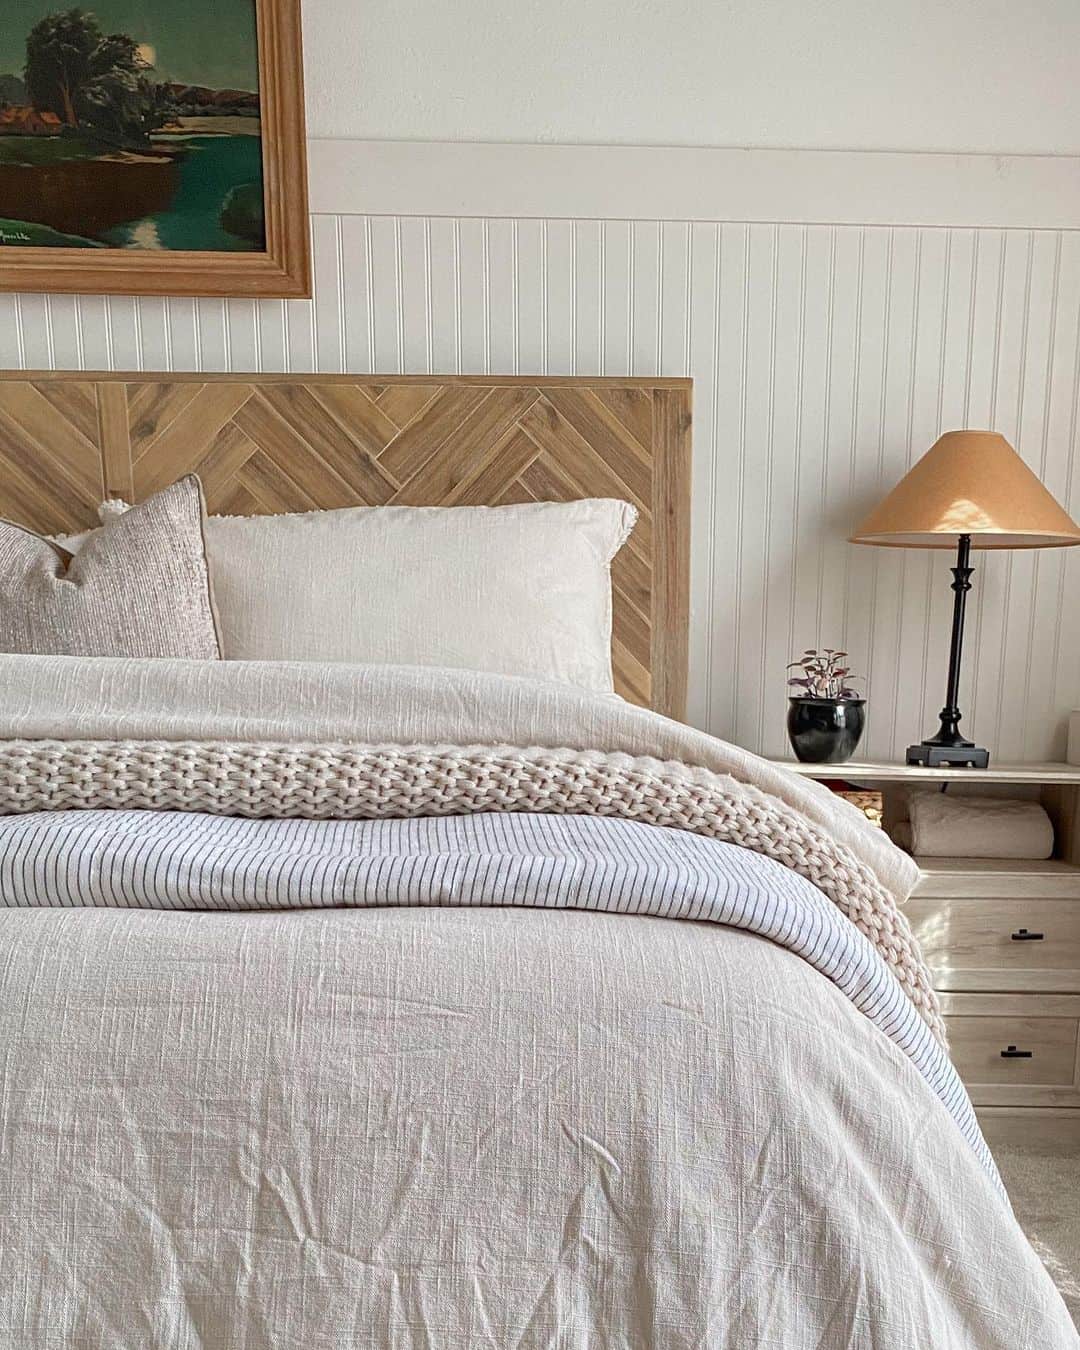 Quaint Bedroom Setting with Off-white Beadboard Wall